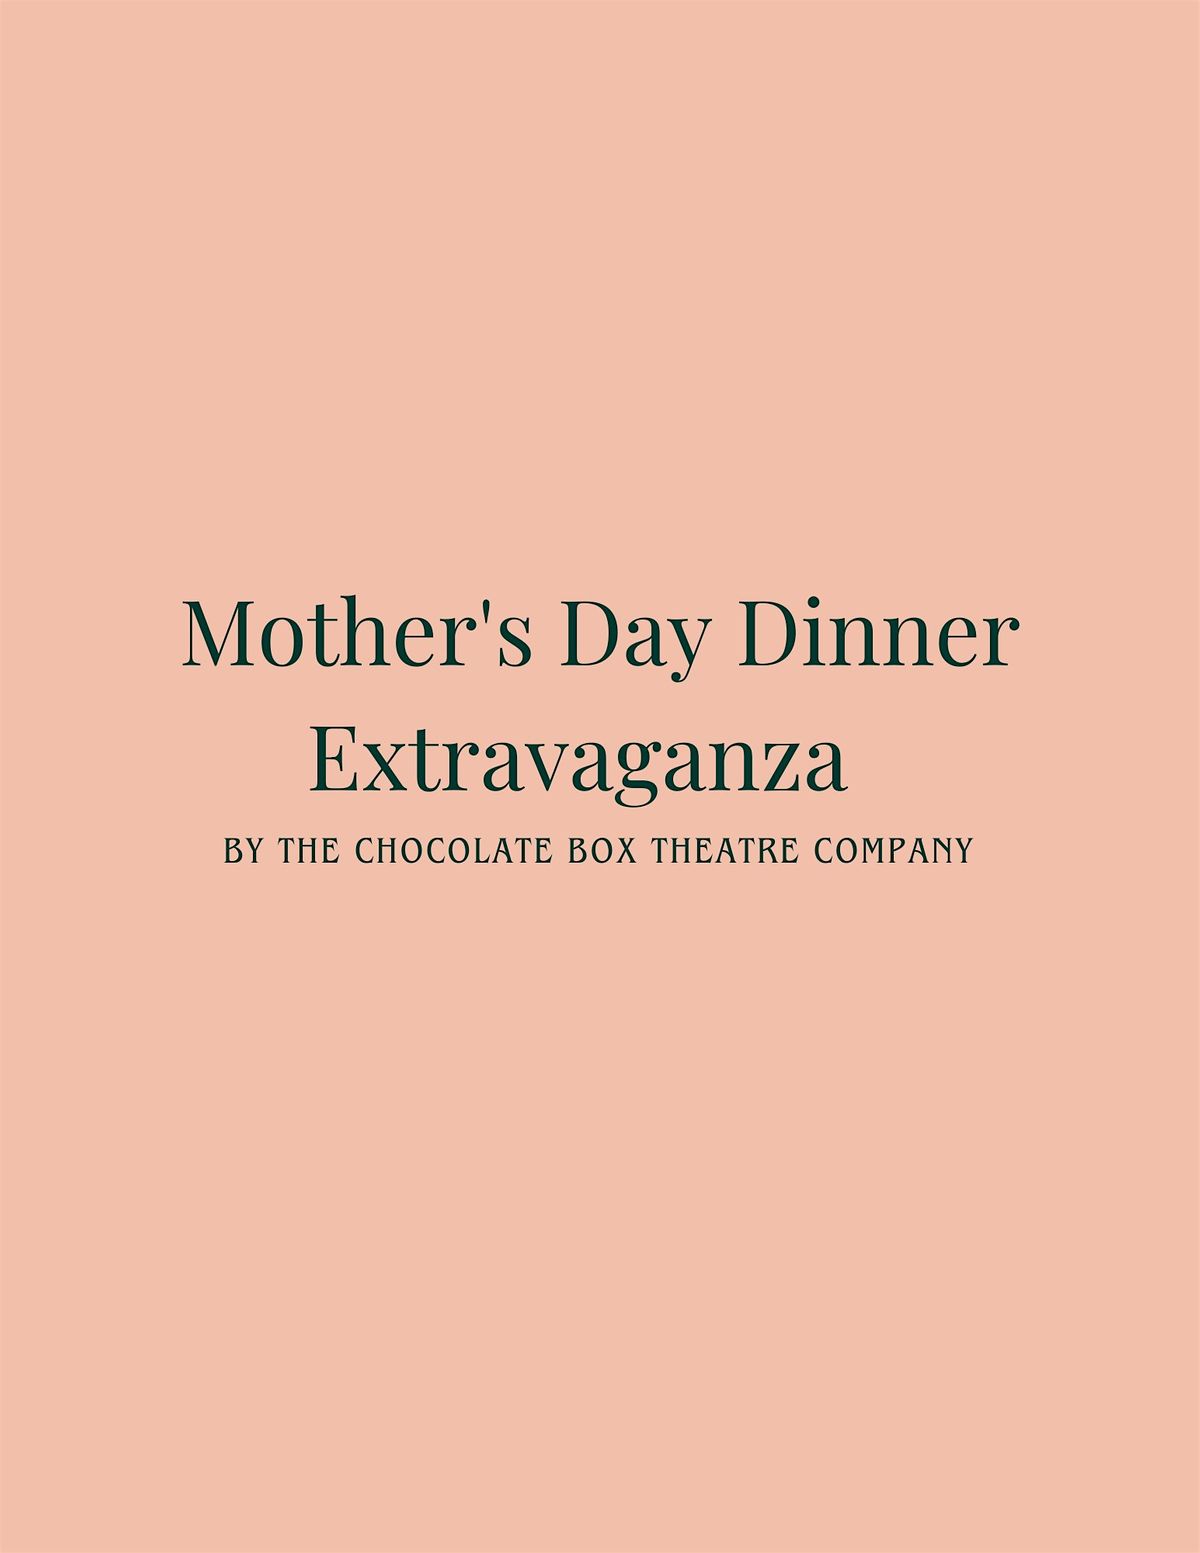 Mother's Day Dinner Extravaganza  by The Chocolate Box Theatre Company.